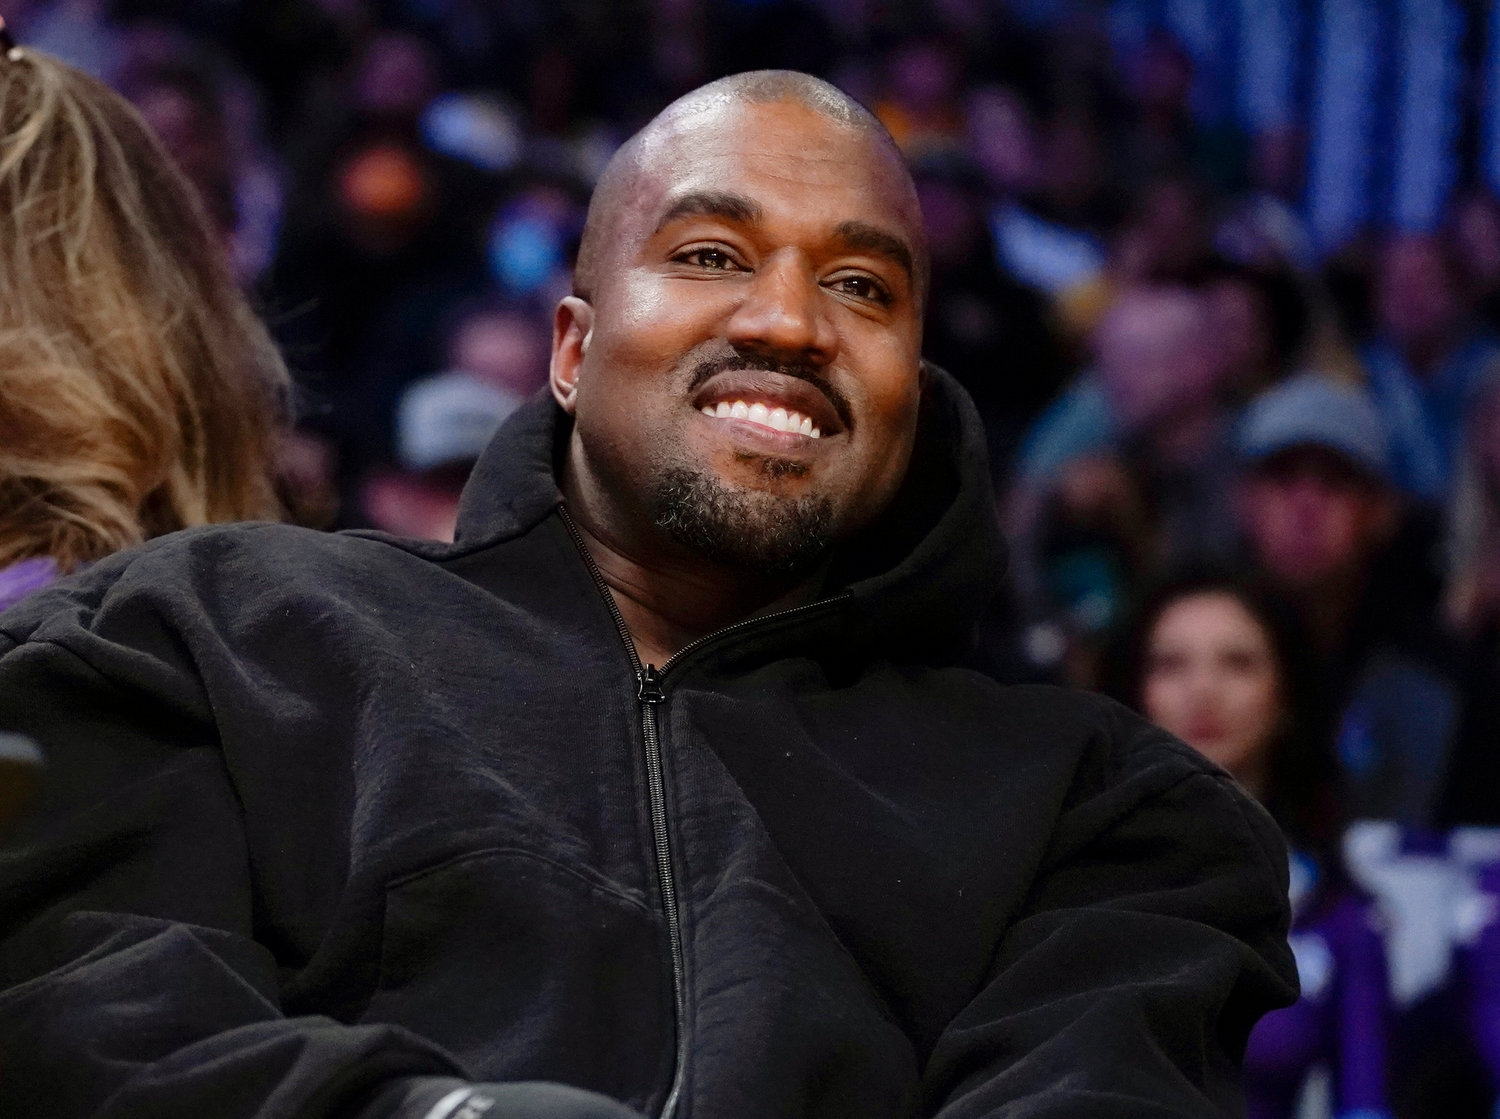 Kanye West watches the first half of an NBA basketball game between the Washington Wizards and the Los Angeles Lakers in Los Angeles, on March 11, 2022 Adidas says it is investigating allegations of inappropriate workplace conduct by the rapper formerly known as Kanye West that ex-employees made in an anonymous letter also accusing the German sportswear brand of looking the other way.